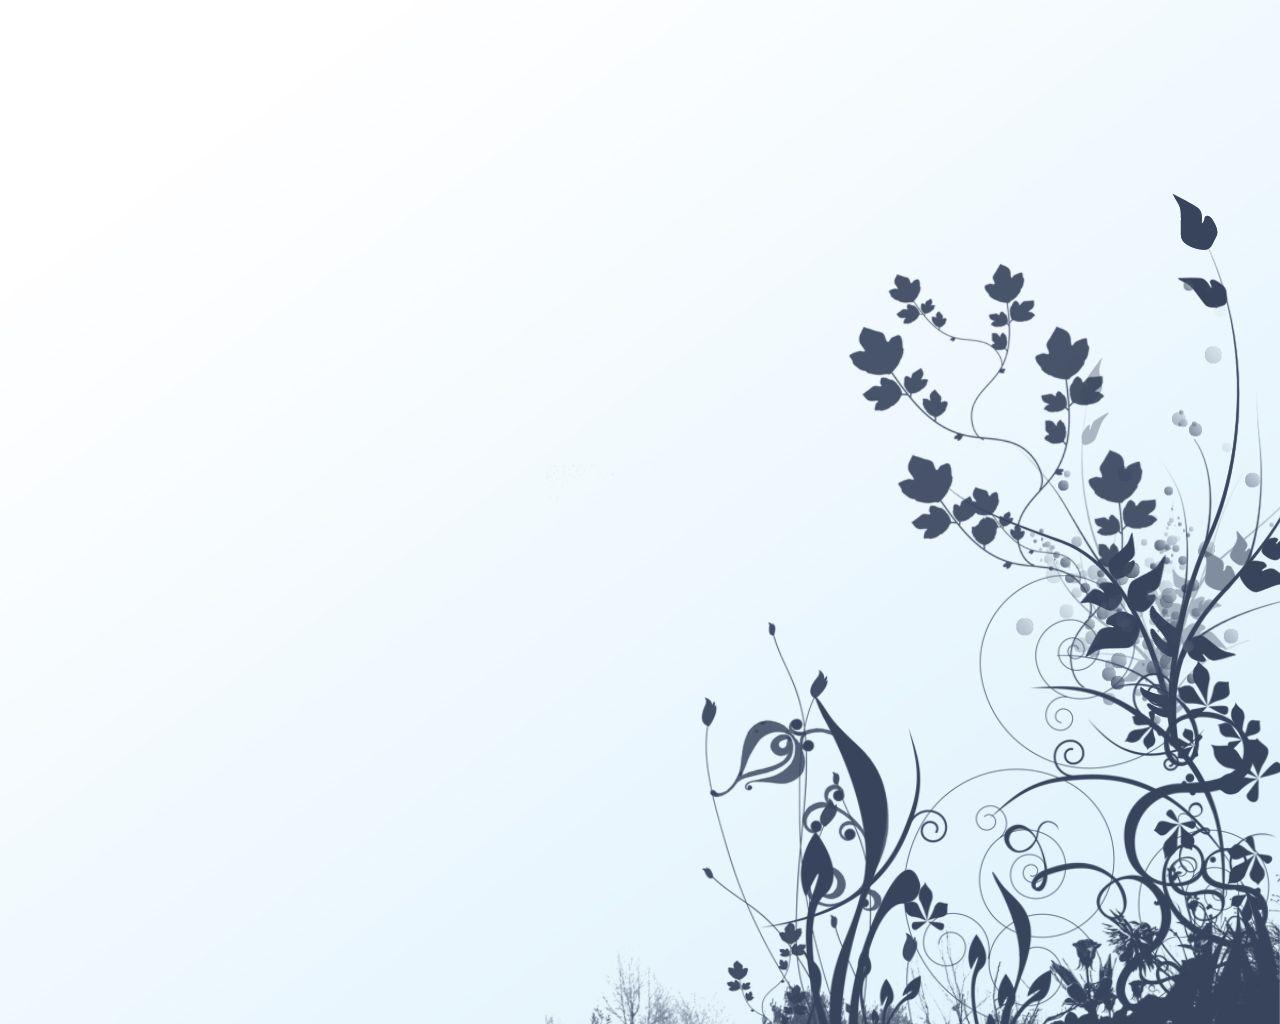 In Gallery: 49 Flourish HD Wallpaper. Background, BsnSCB Graphics